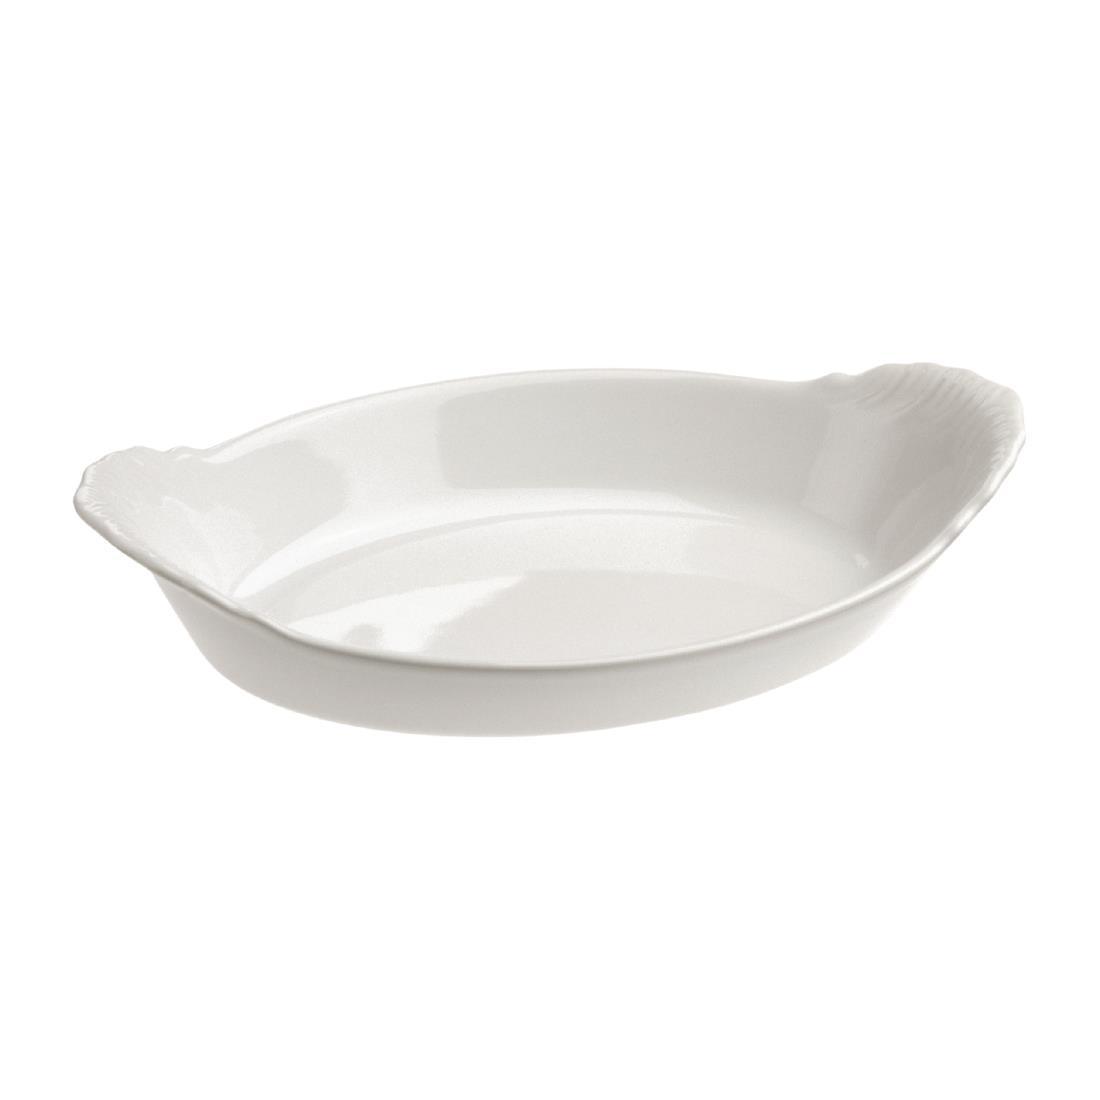 Revol French Classics Oval Eared Dishes 200mm (Pack of 4) - DB341  - 2